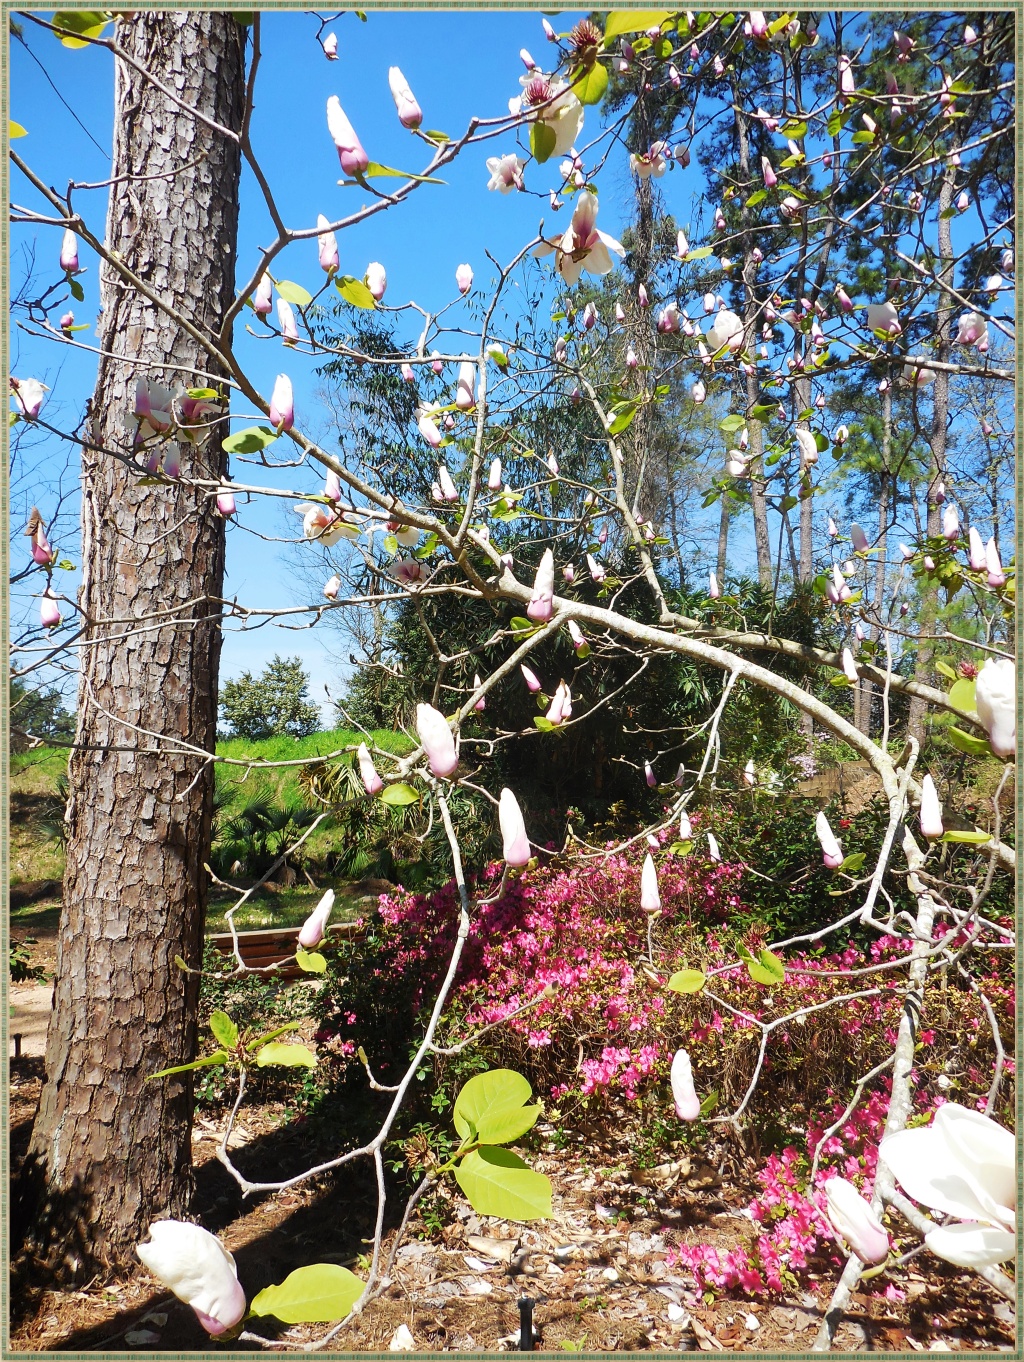 The smell of these magnolias permeated the whole garden.